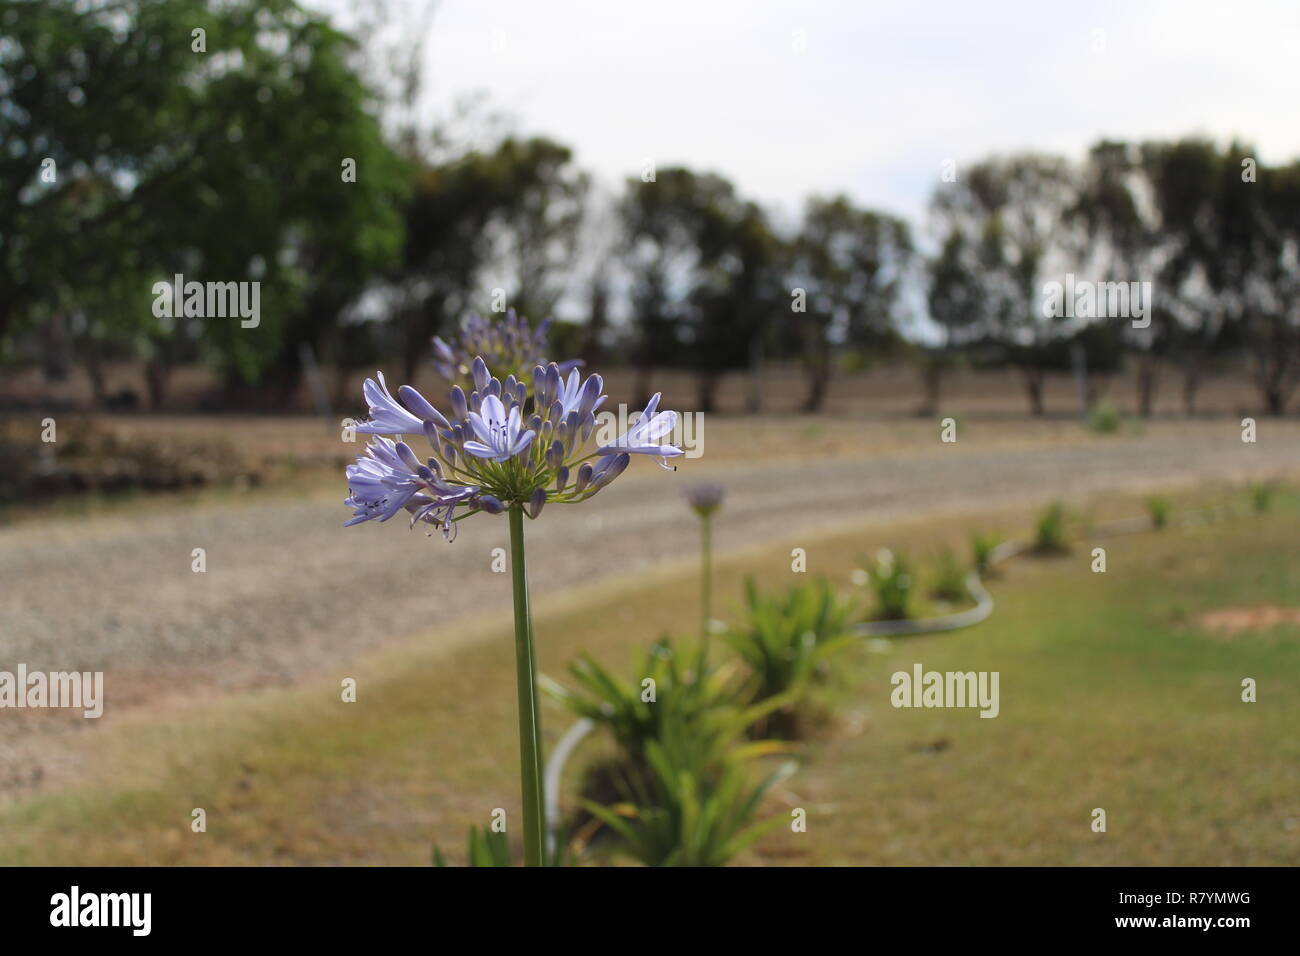 Agapanthus praecox in a garden standing alone Stock Photo